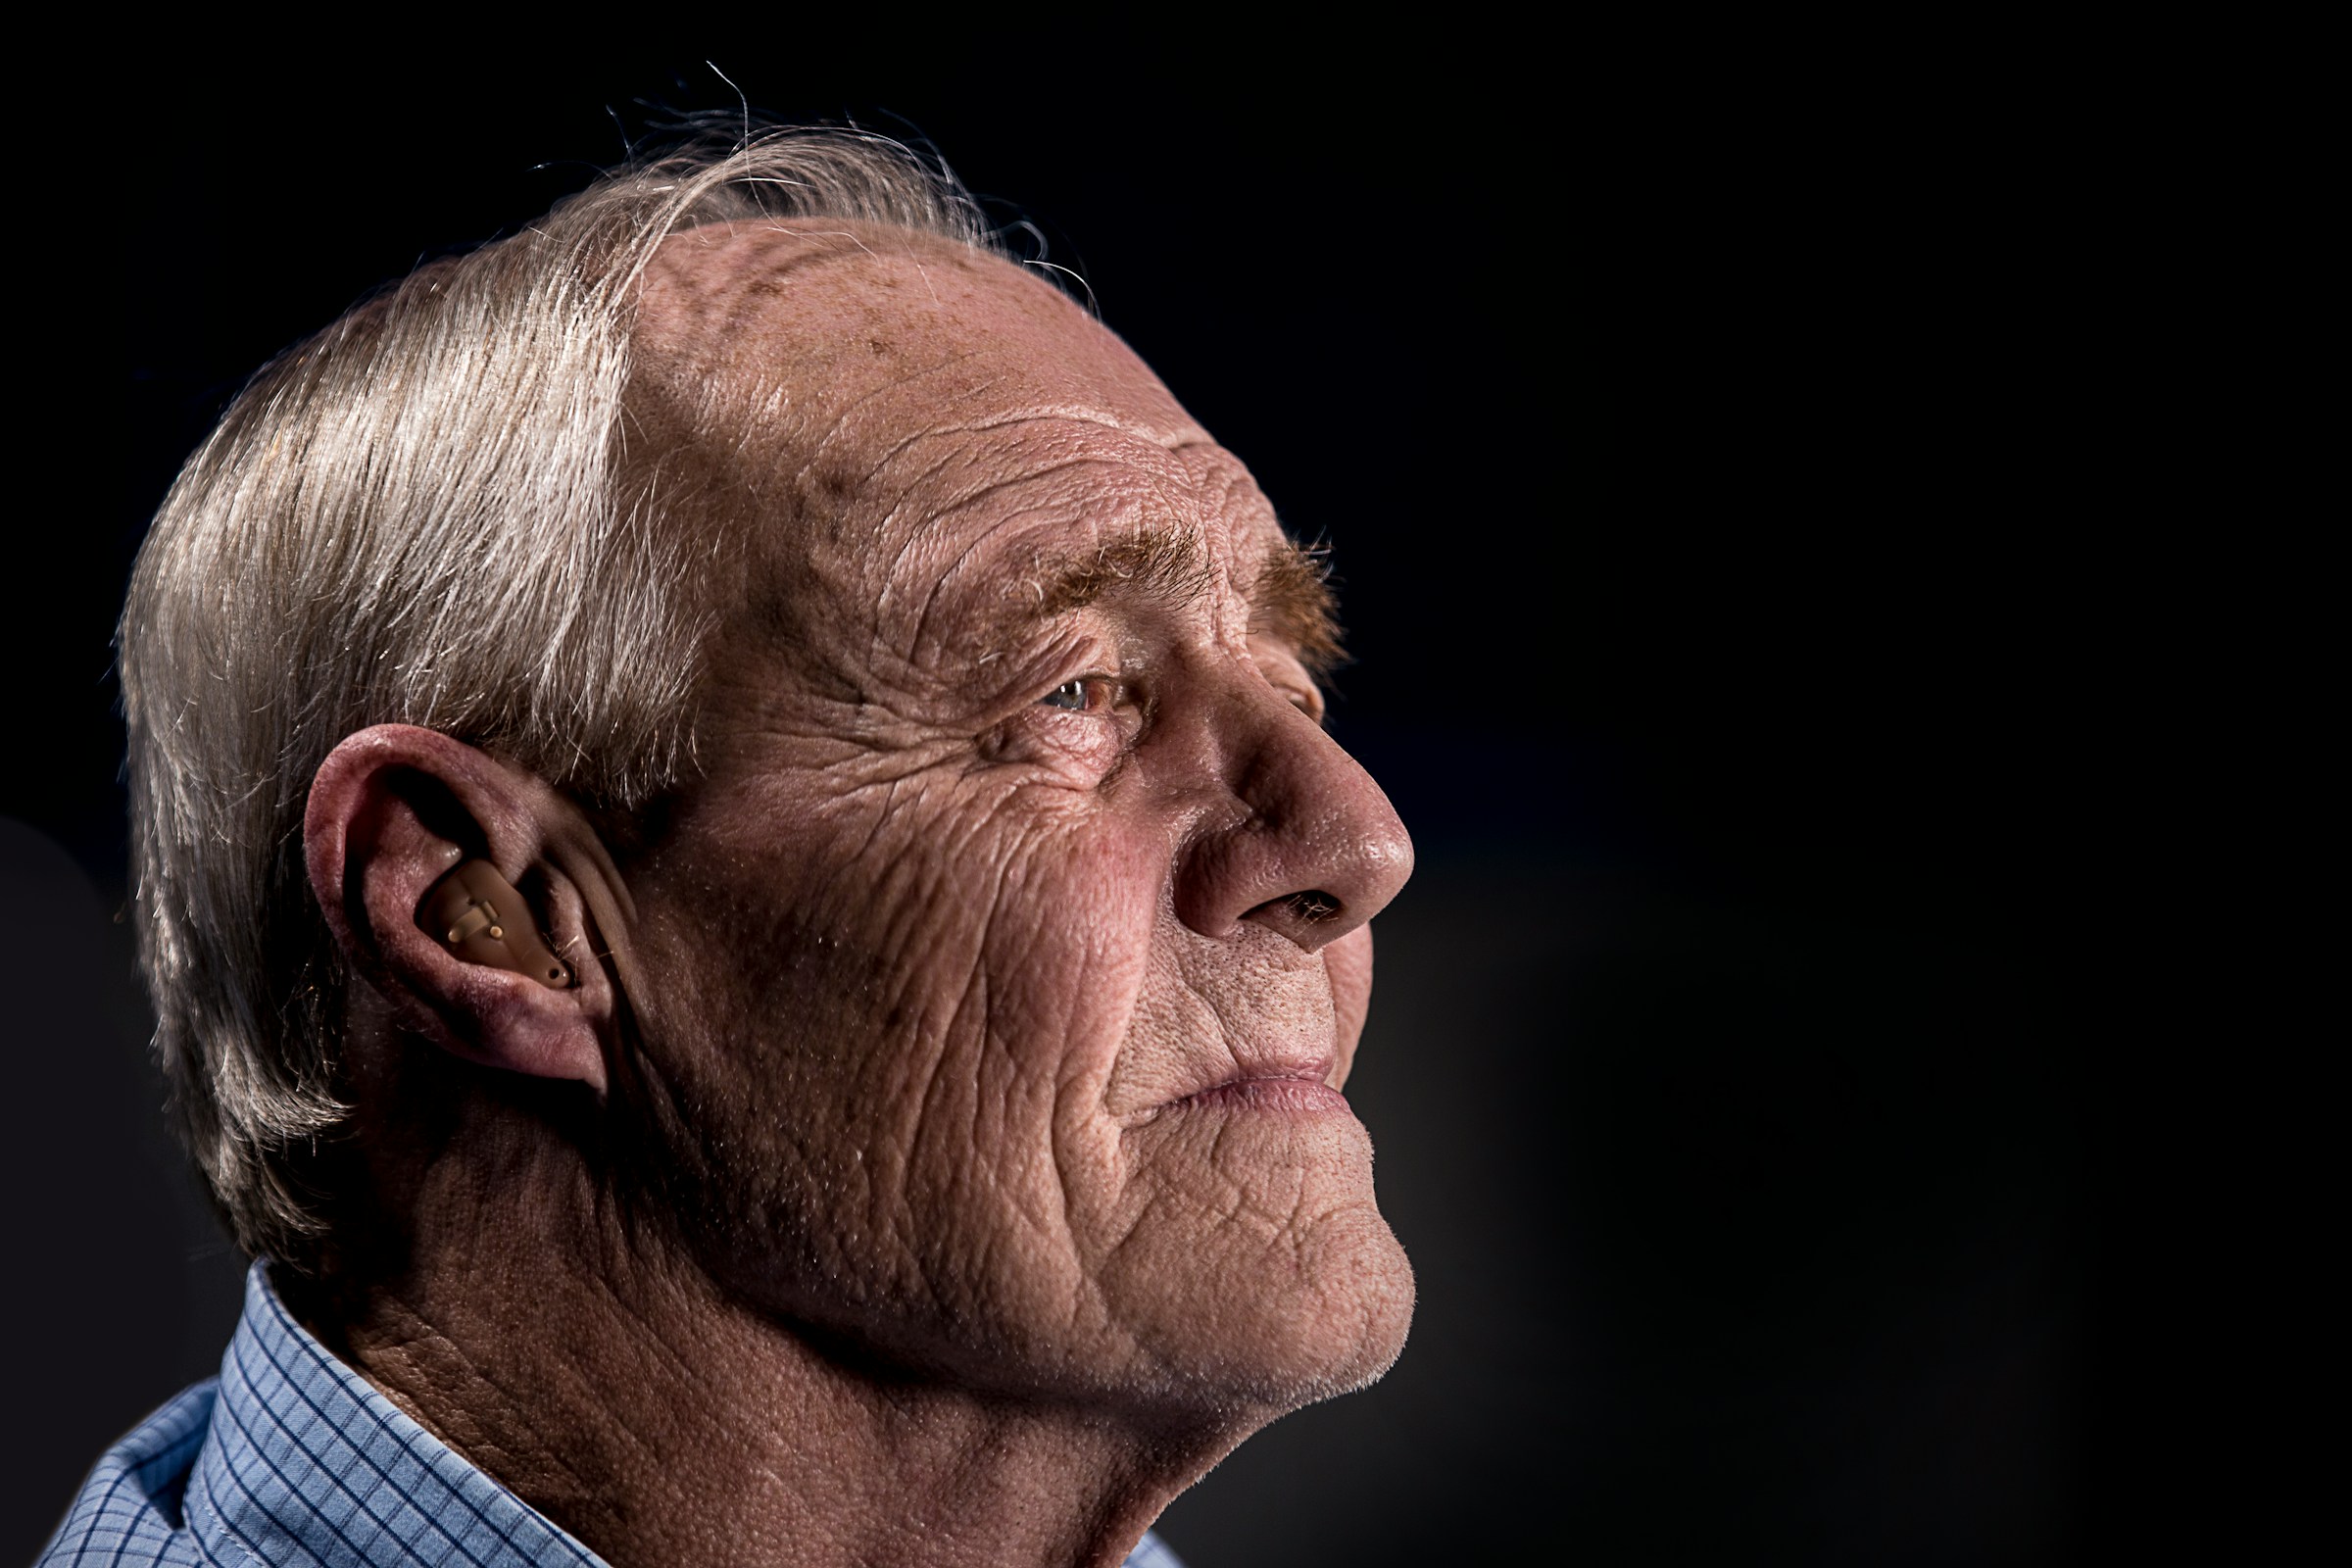 An old man with a hearing aid | Source: Unsplash